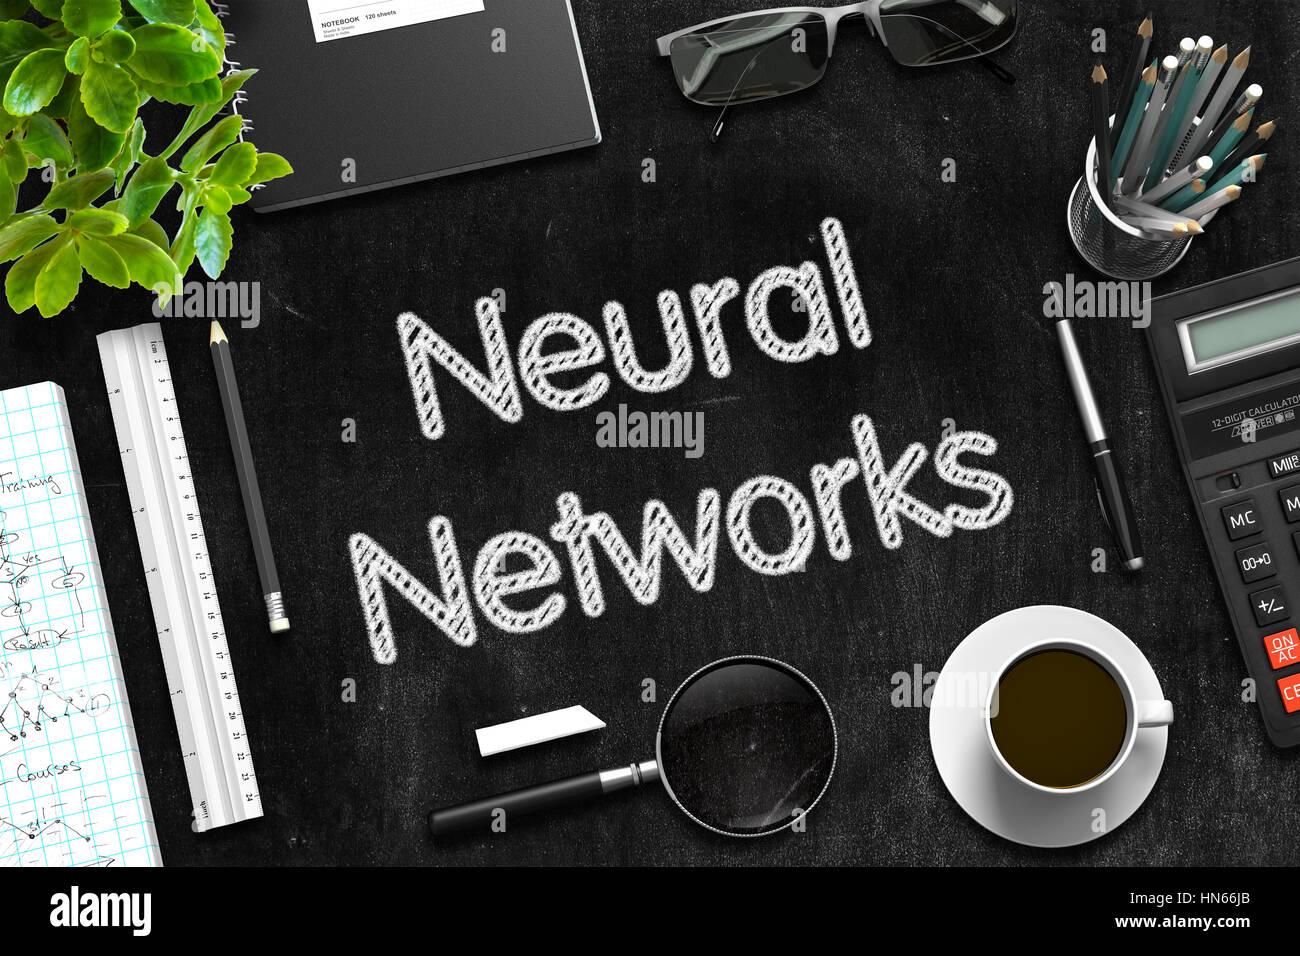 Neural Networks. 3D Rendering. Stock Photo